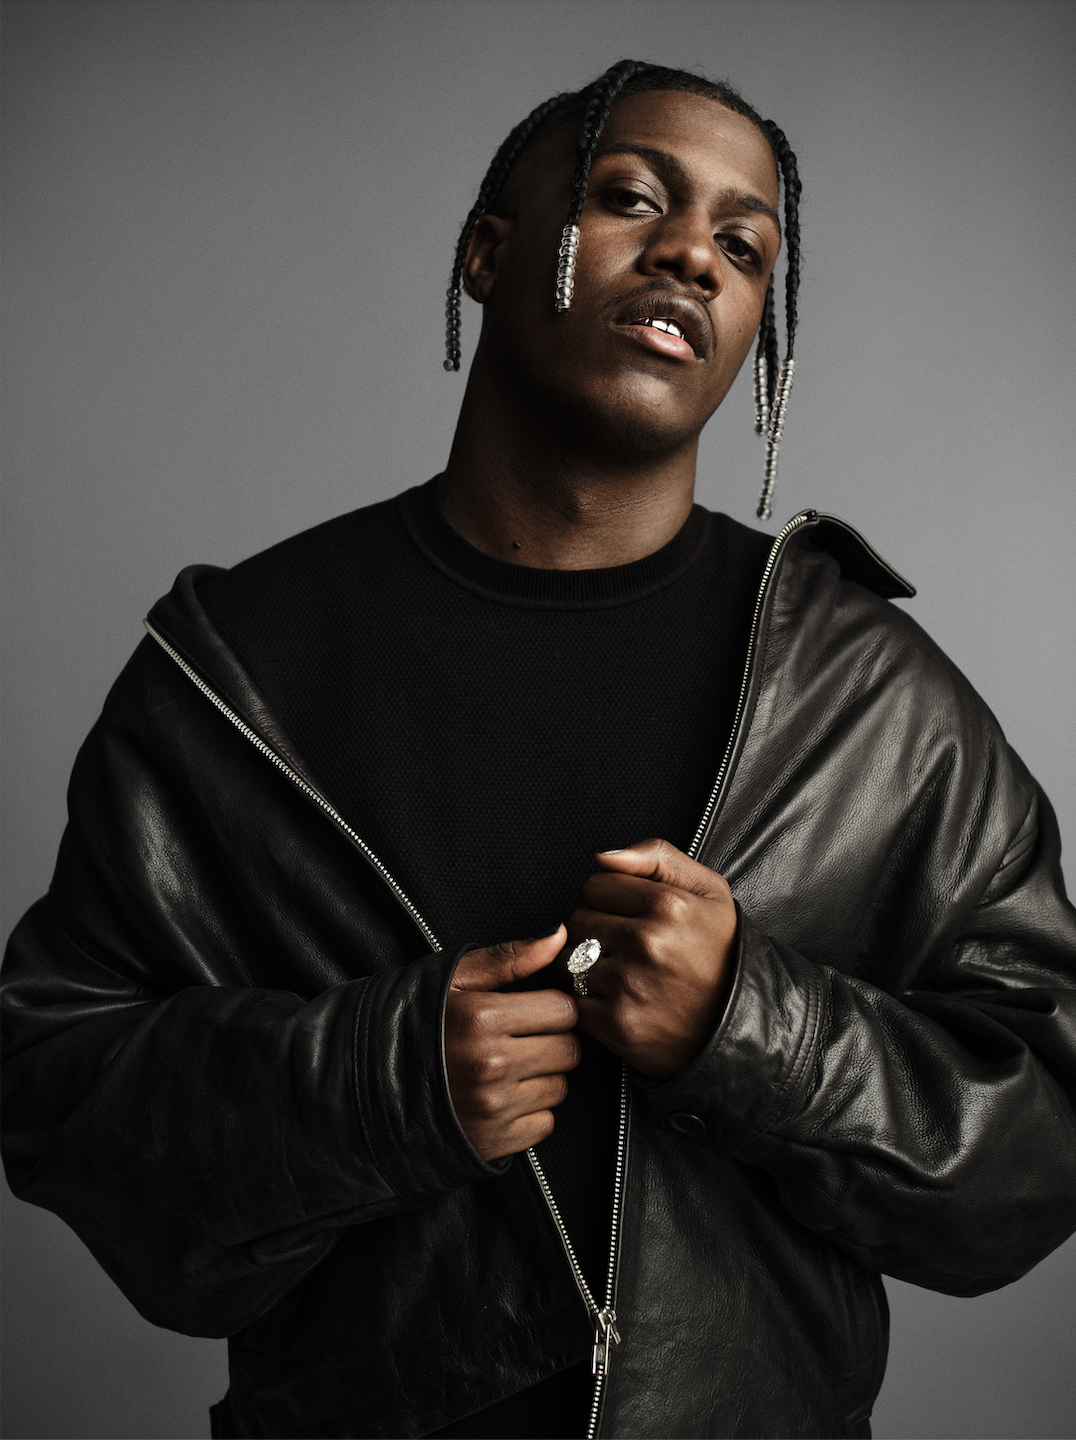 Artist Lil Yachty poses for YSL Beauty's newest fragrance